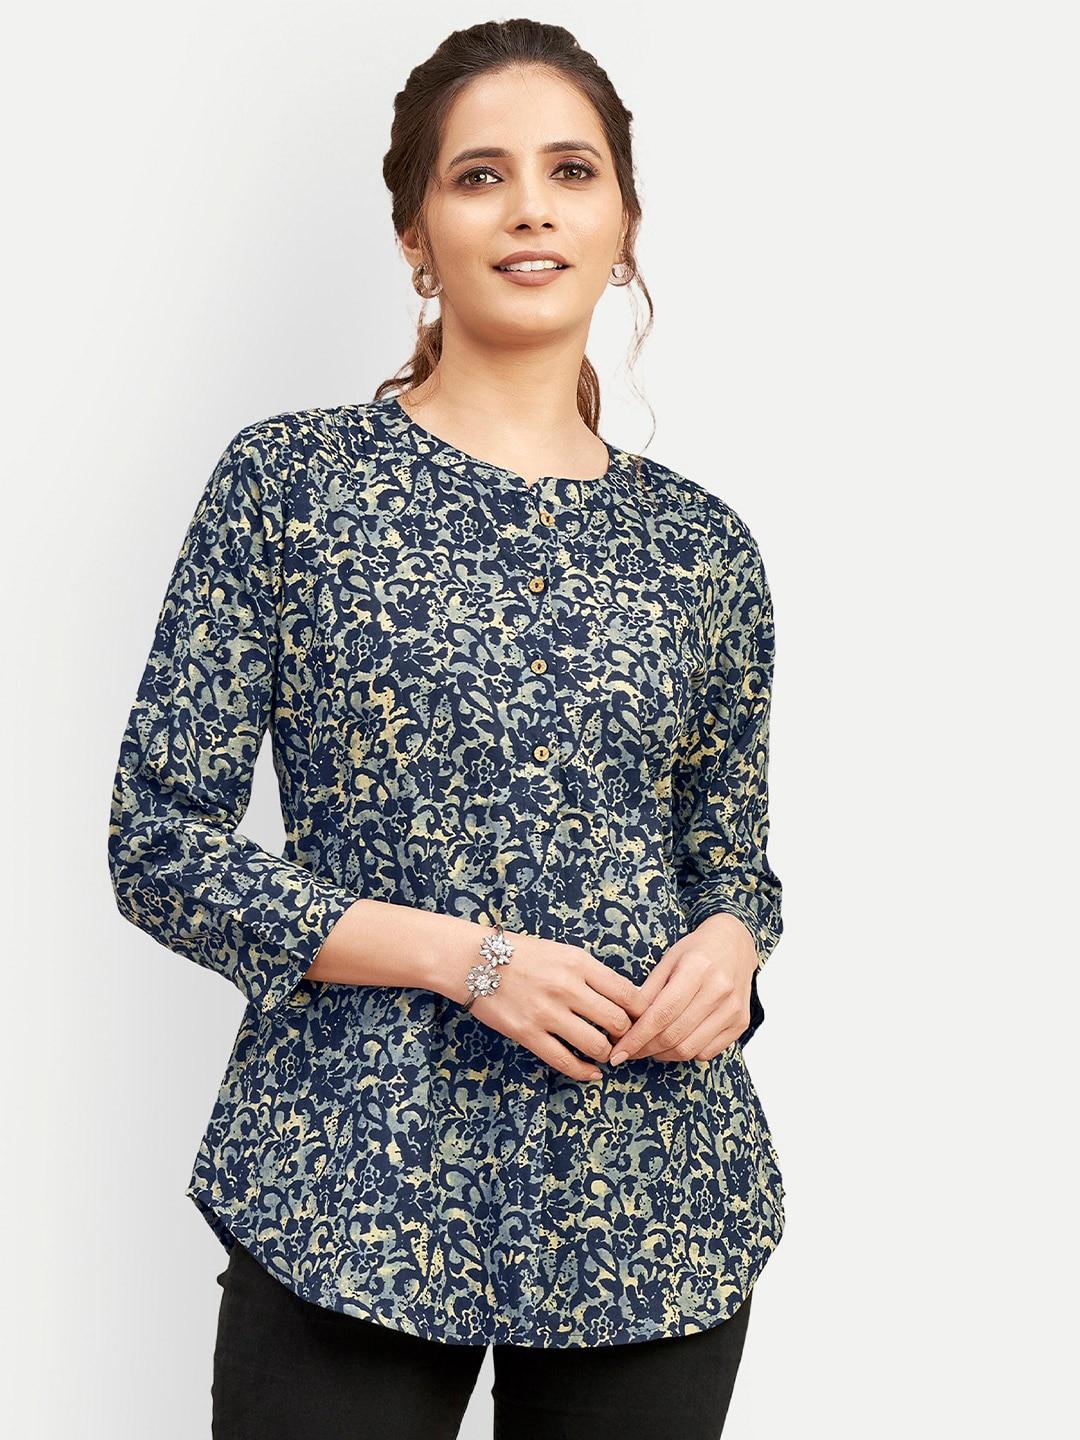 dresoul floral printed cotton shirt style top